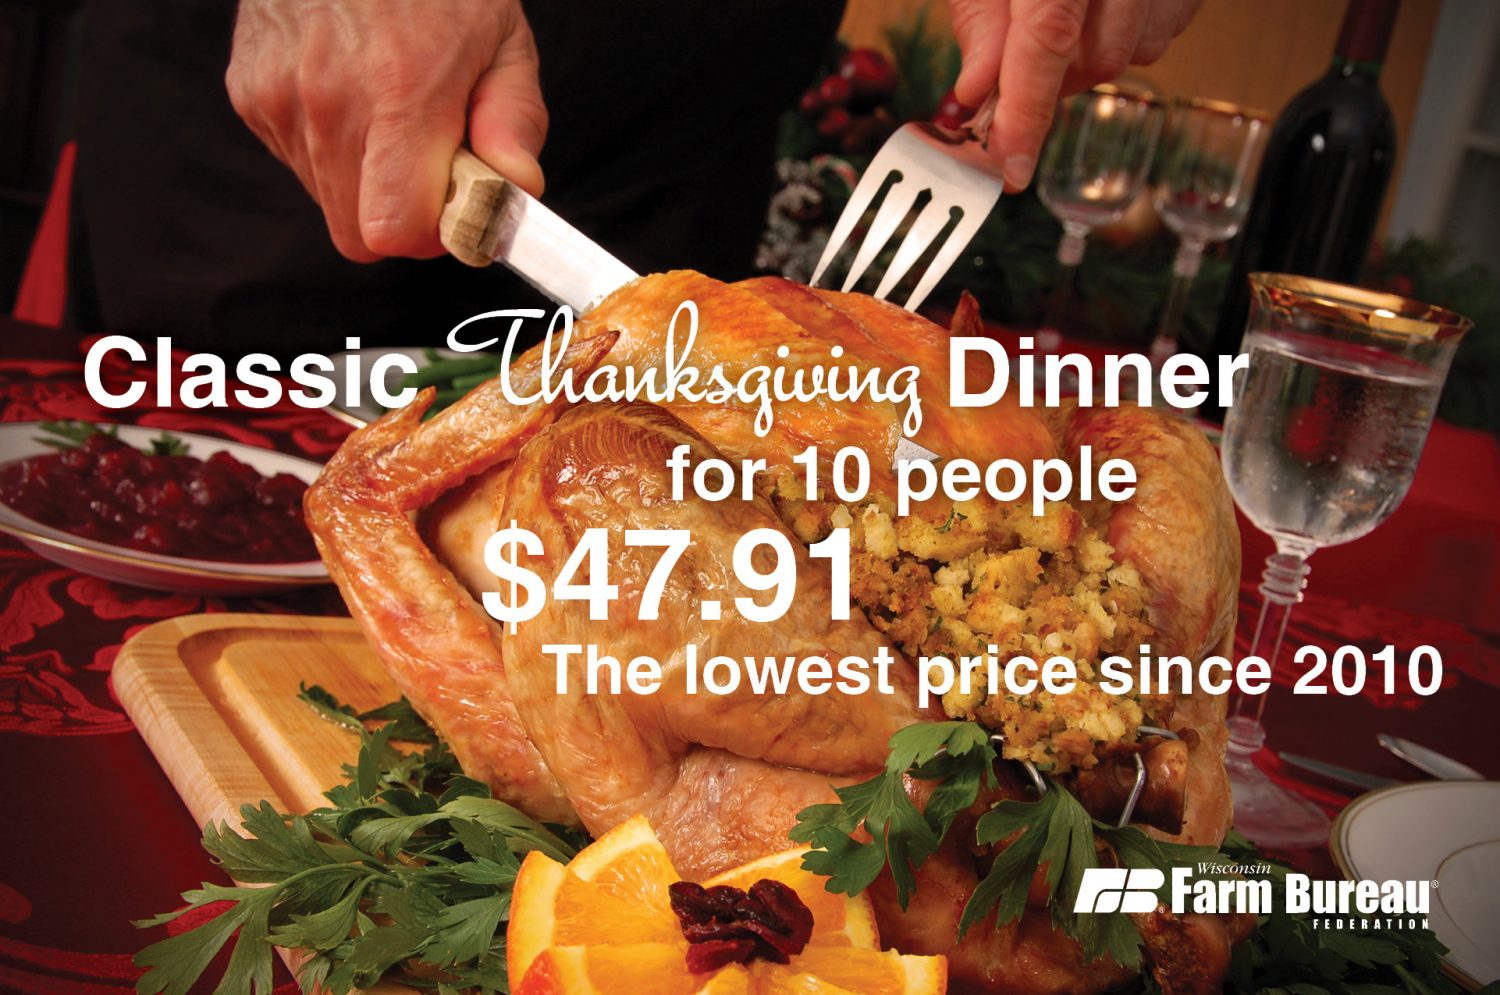 Thanksgiving dinner costs less this year